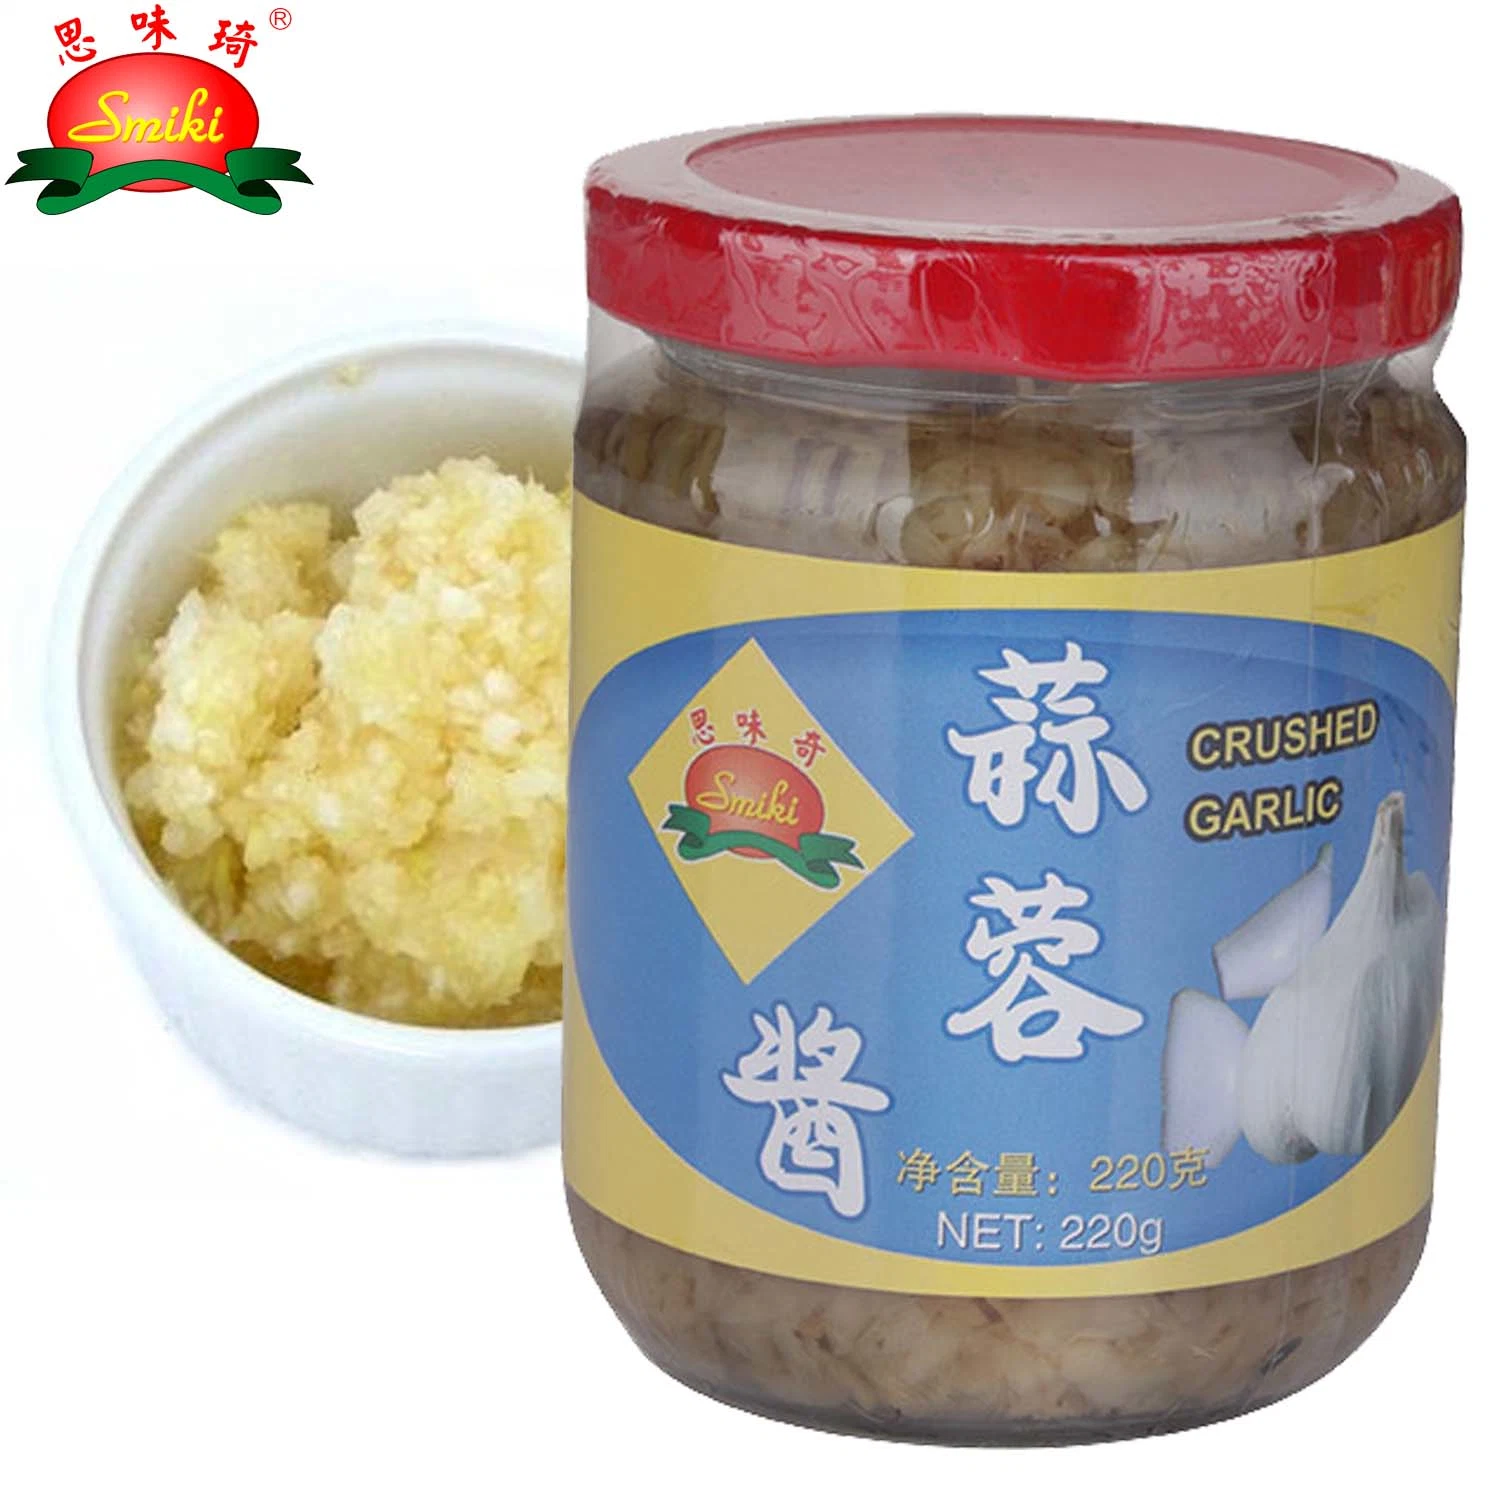 Crushed Garlic Suitable for Pan Frying Vegetables with Delicious Taste